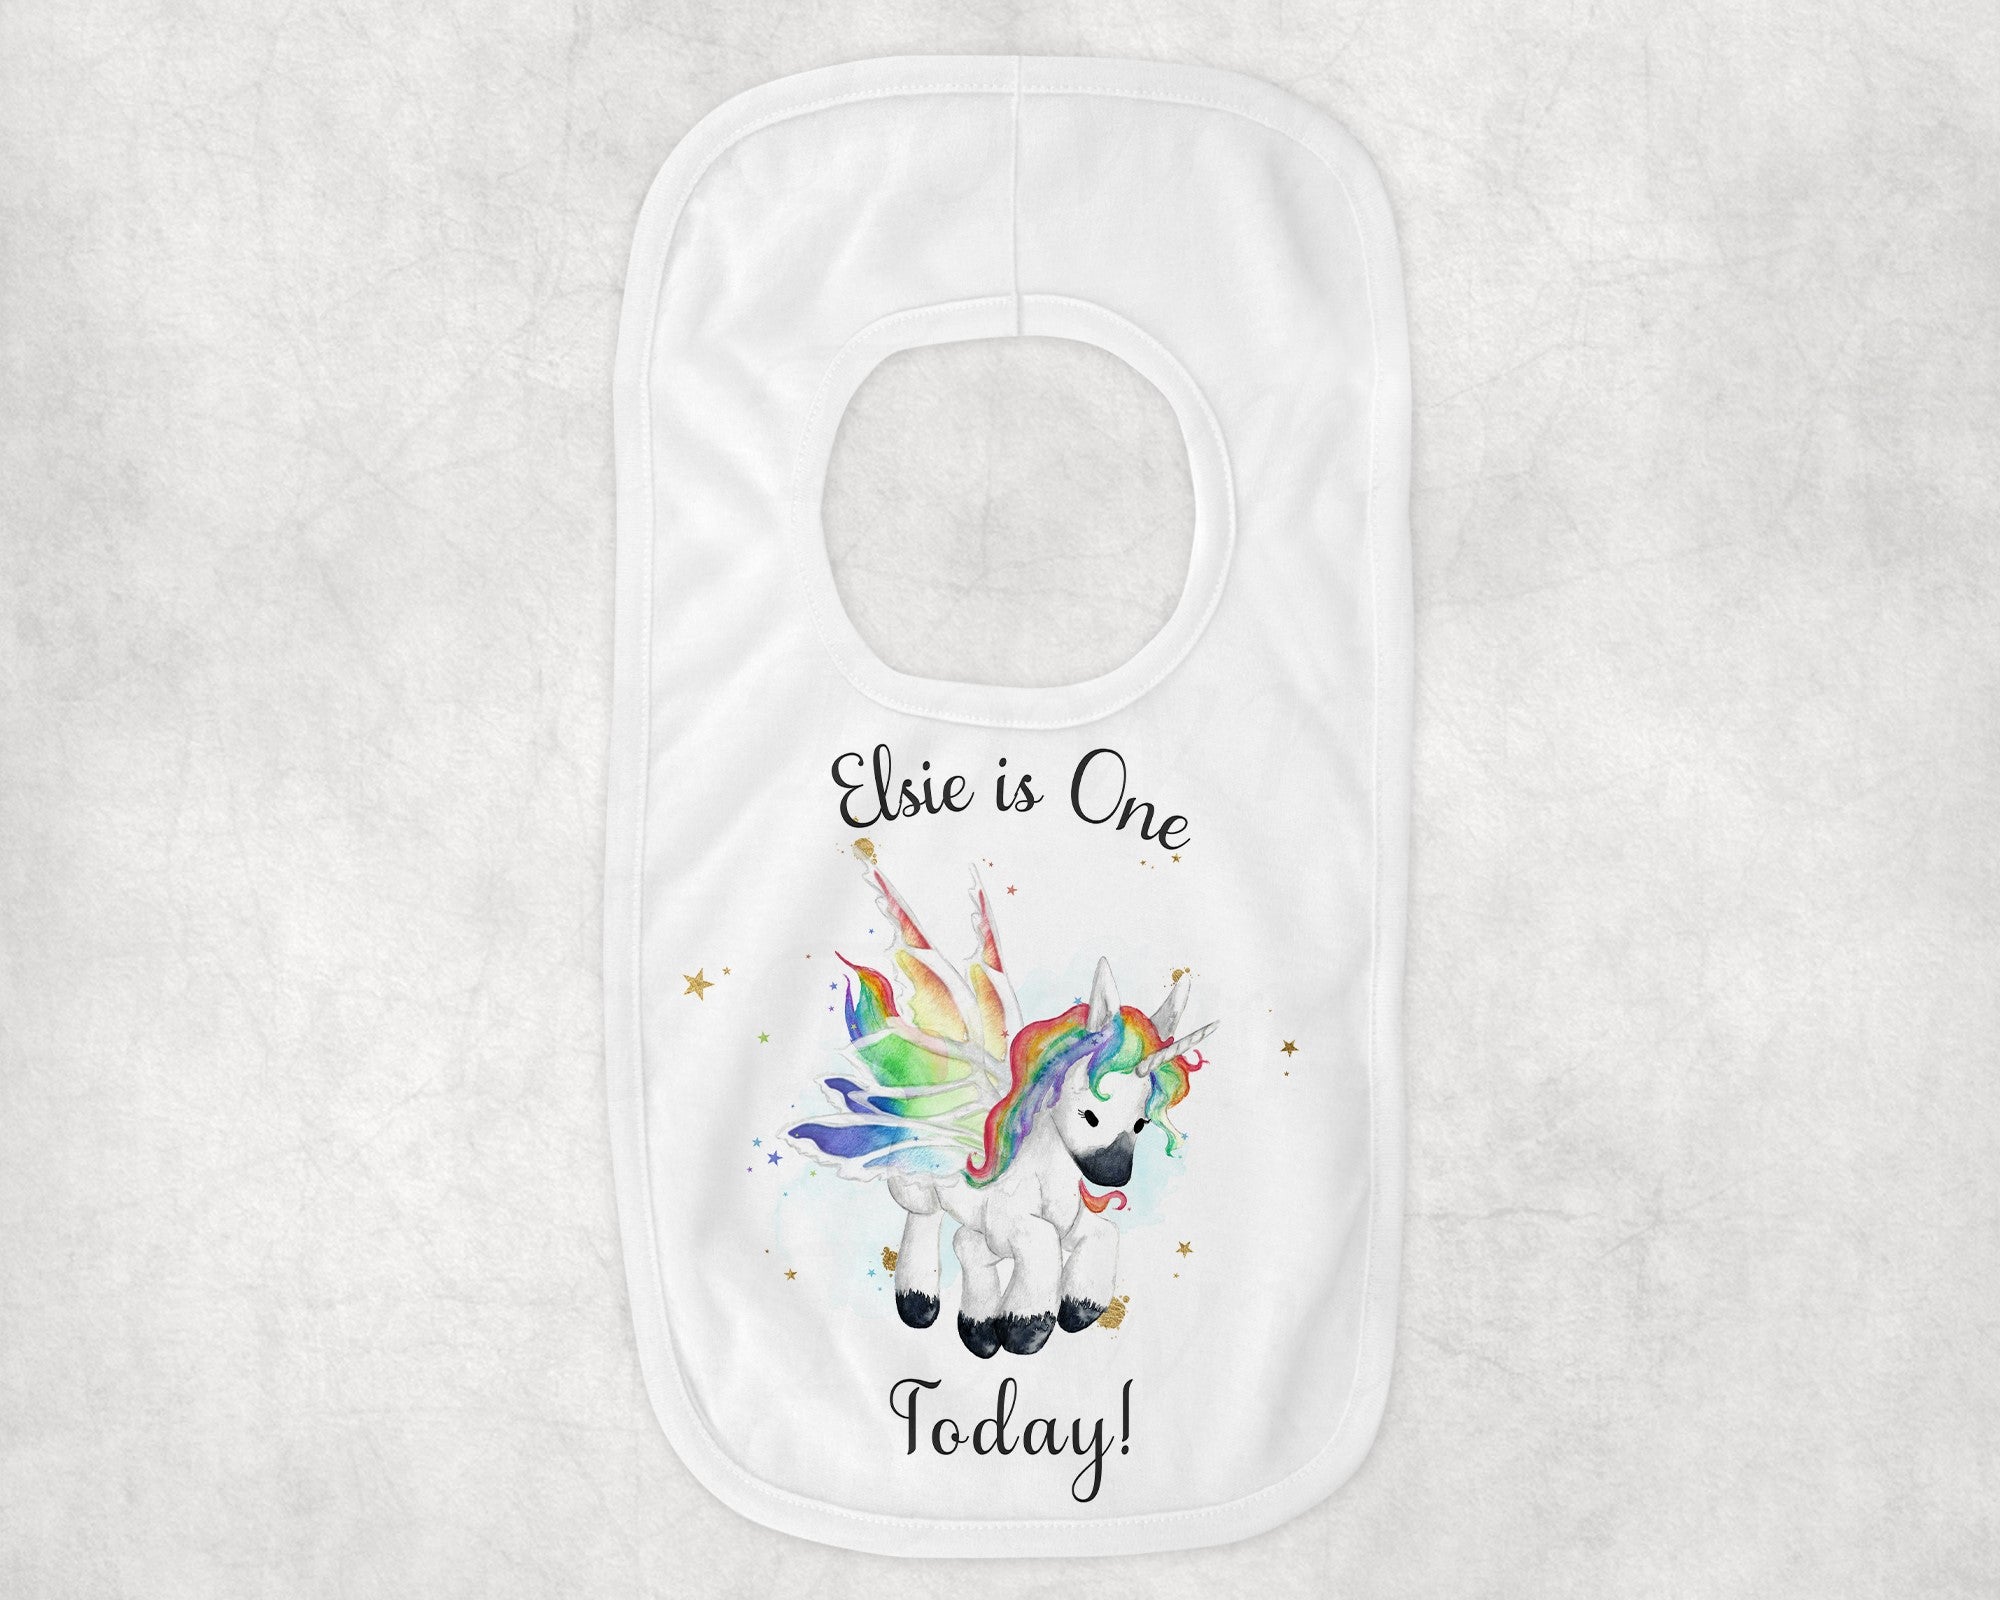 Customisable Unicorn Bib - Super Soft and Absorbent for Your Little One